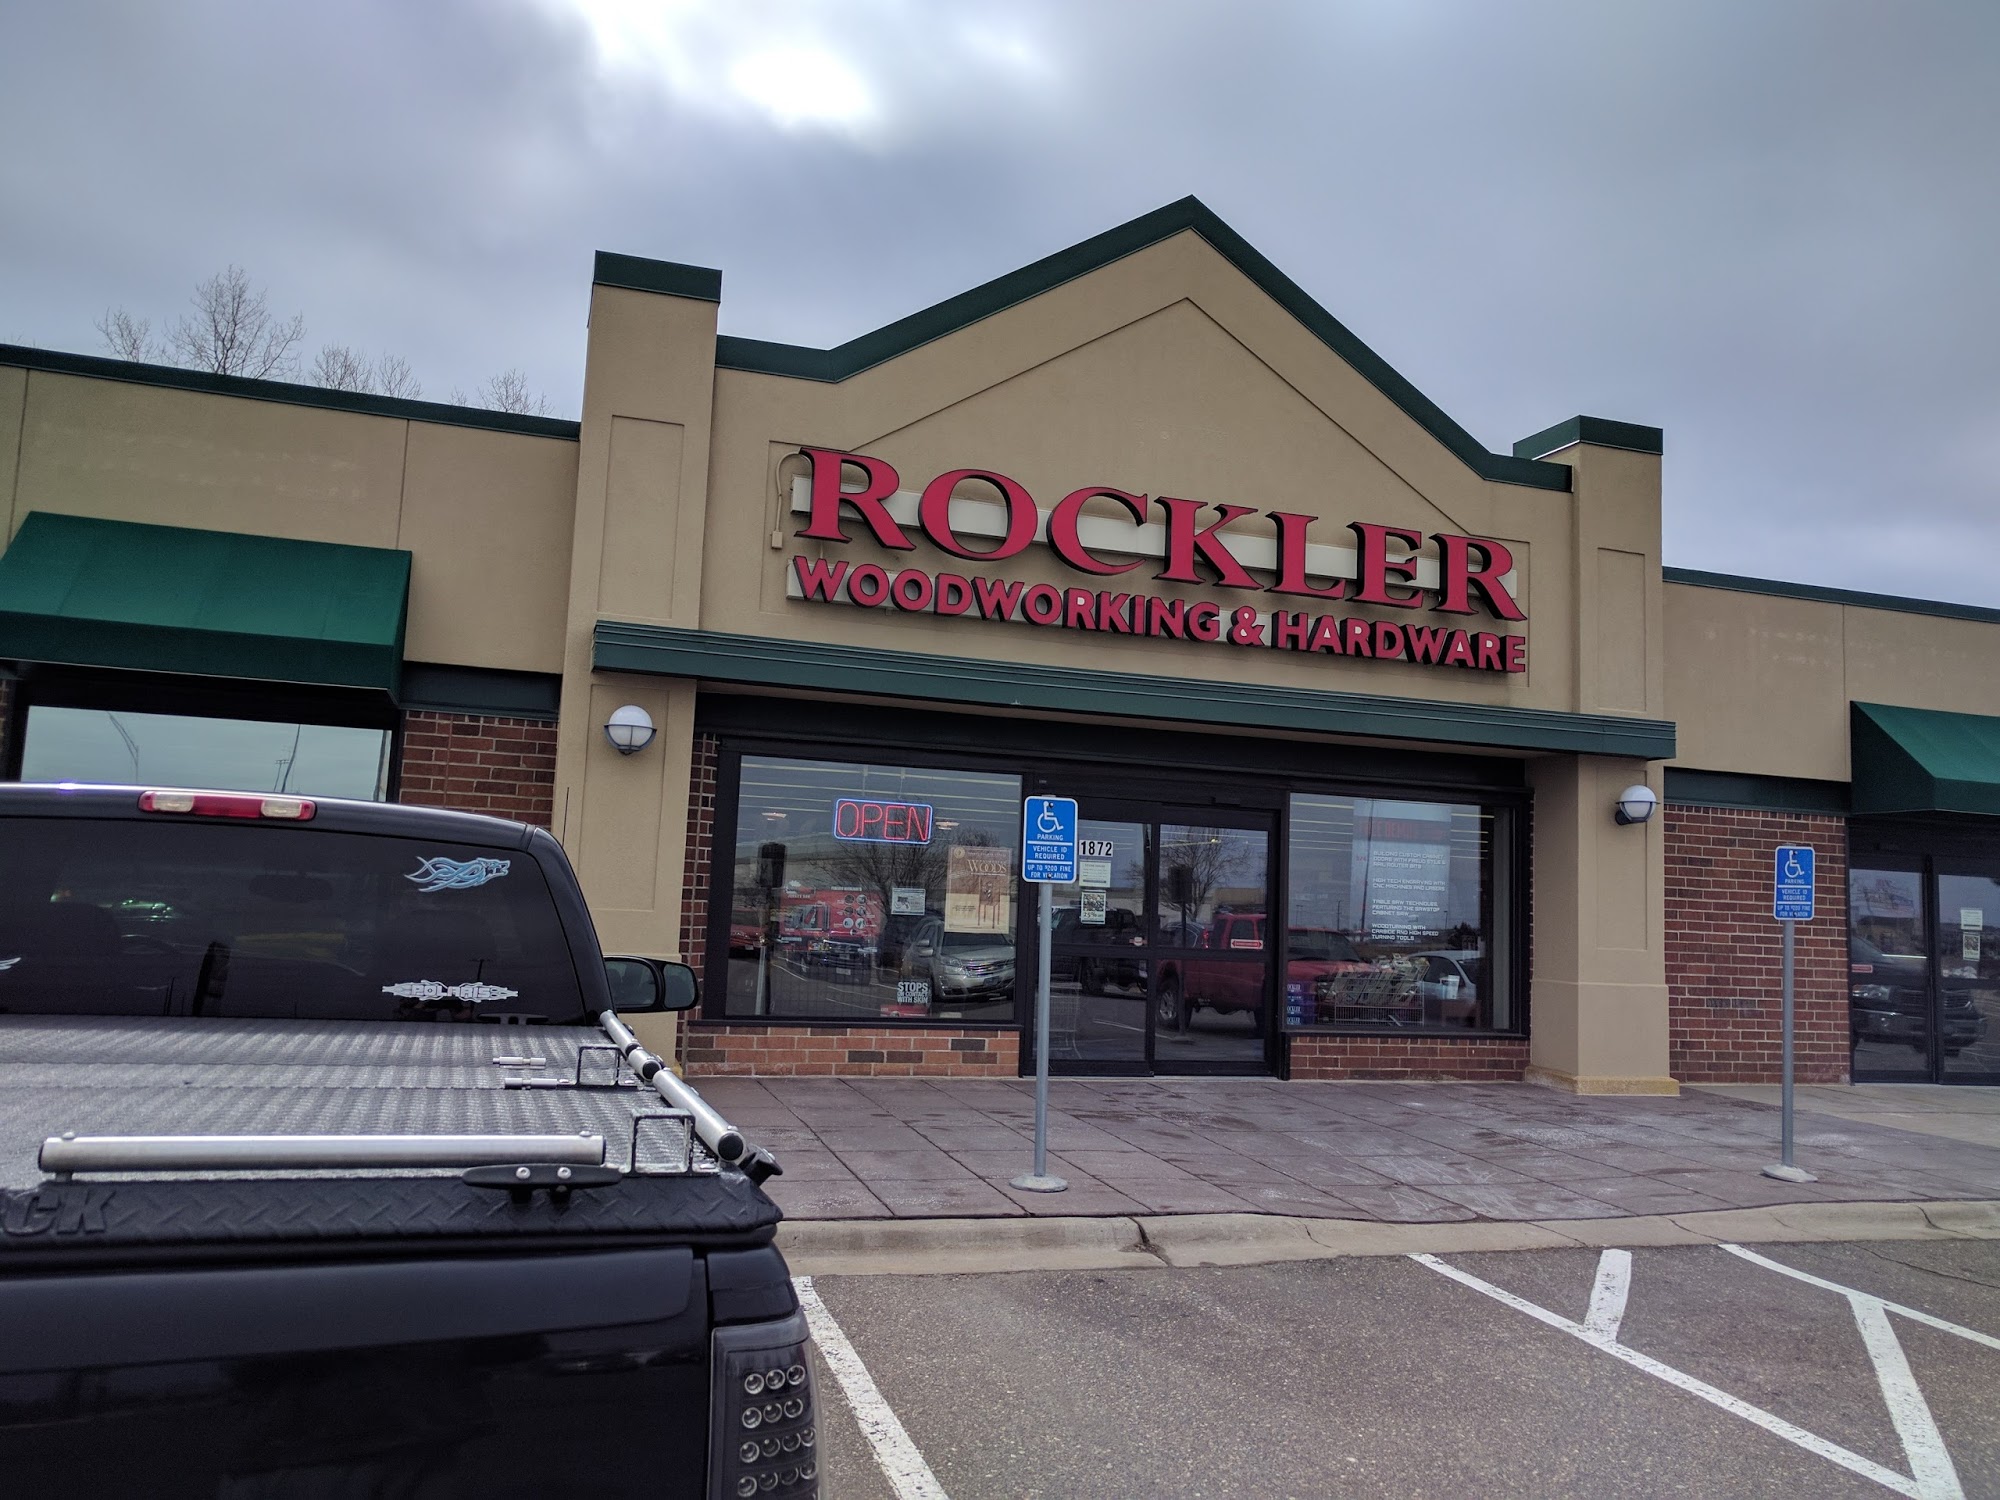 Rockler Woodworking and Hardware - Maplewood